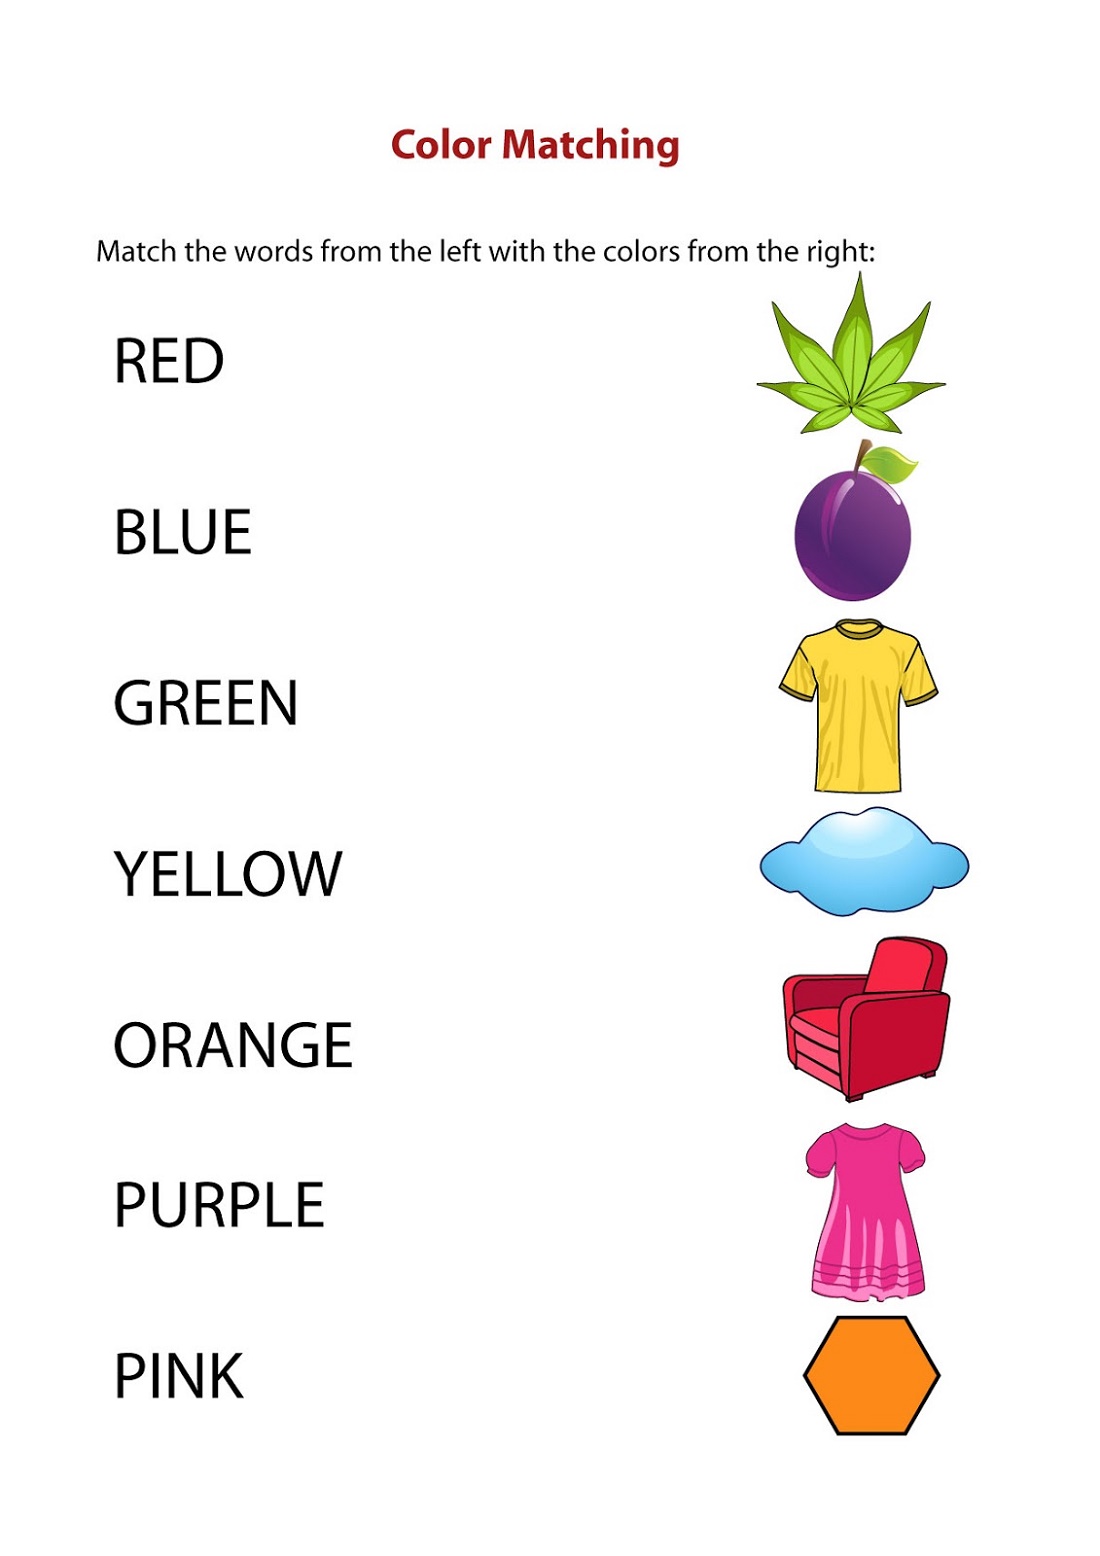 Colors Worksheets For Preschoolers Free Printables Matching